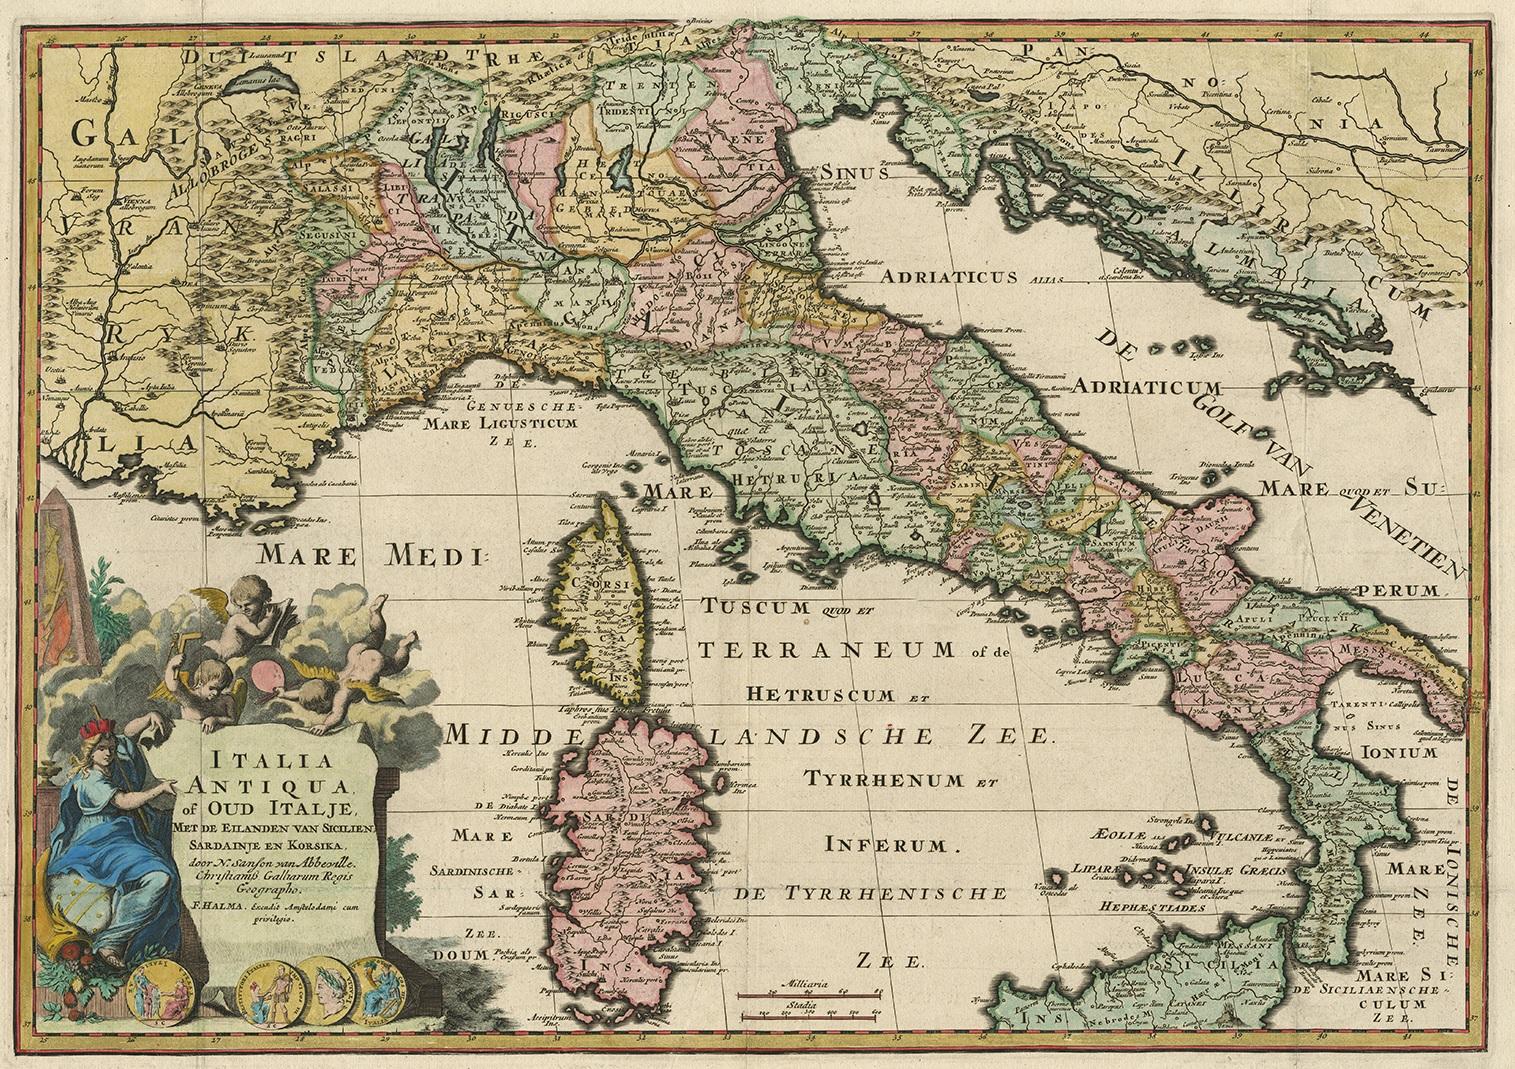 Antique map titled 'Italia Antiqua of Oud Italje (..)'. Very decorative map of ancient Italy and the islands Corsica, Sicily and Sardinia after N. Sanson, published by Francois Halma. Published by Francois Halma, circa 1700.